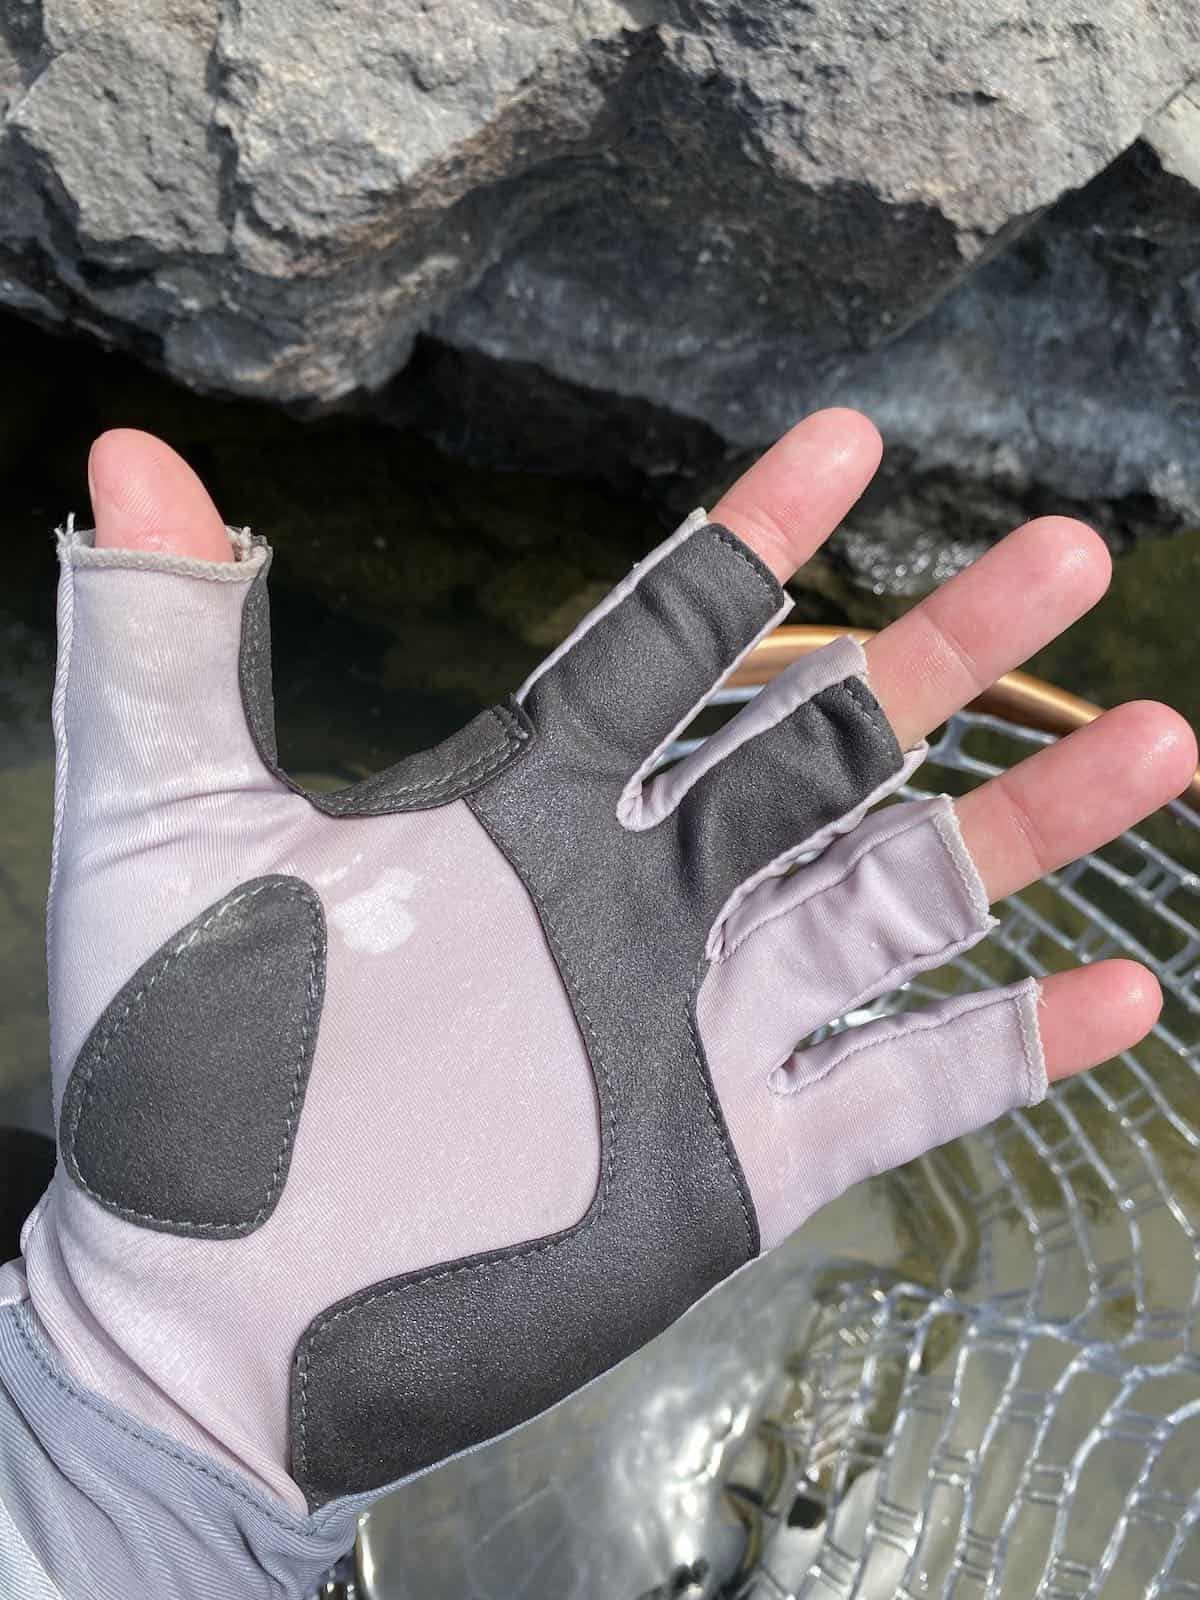 open palm wet fly fishing glove